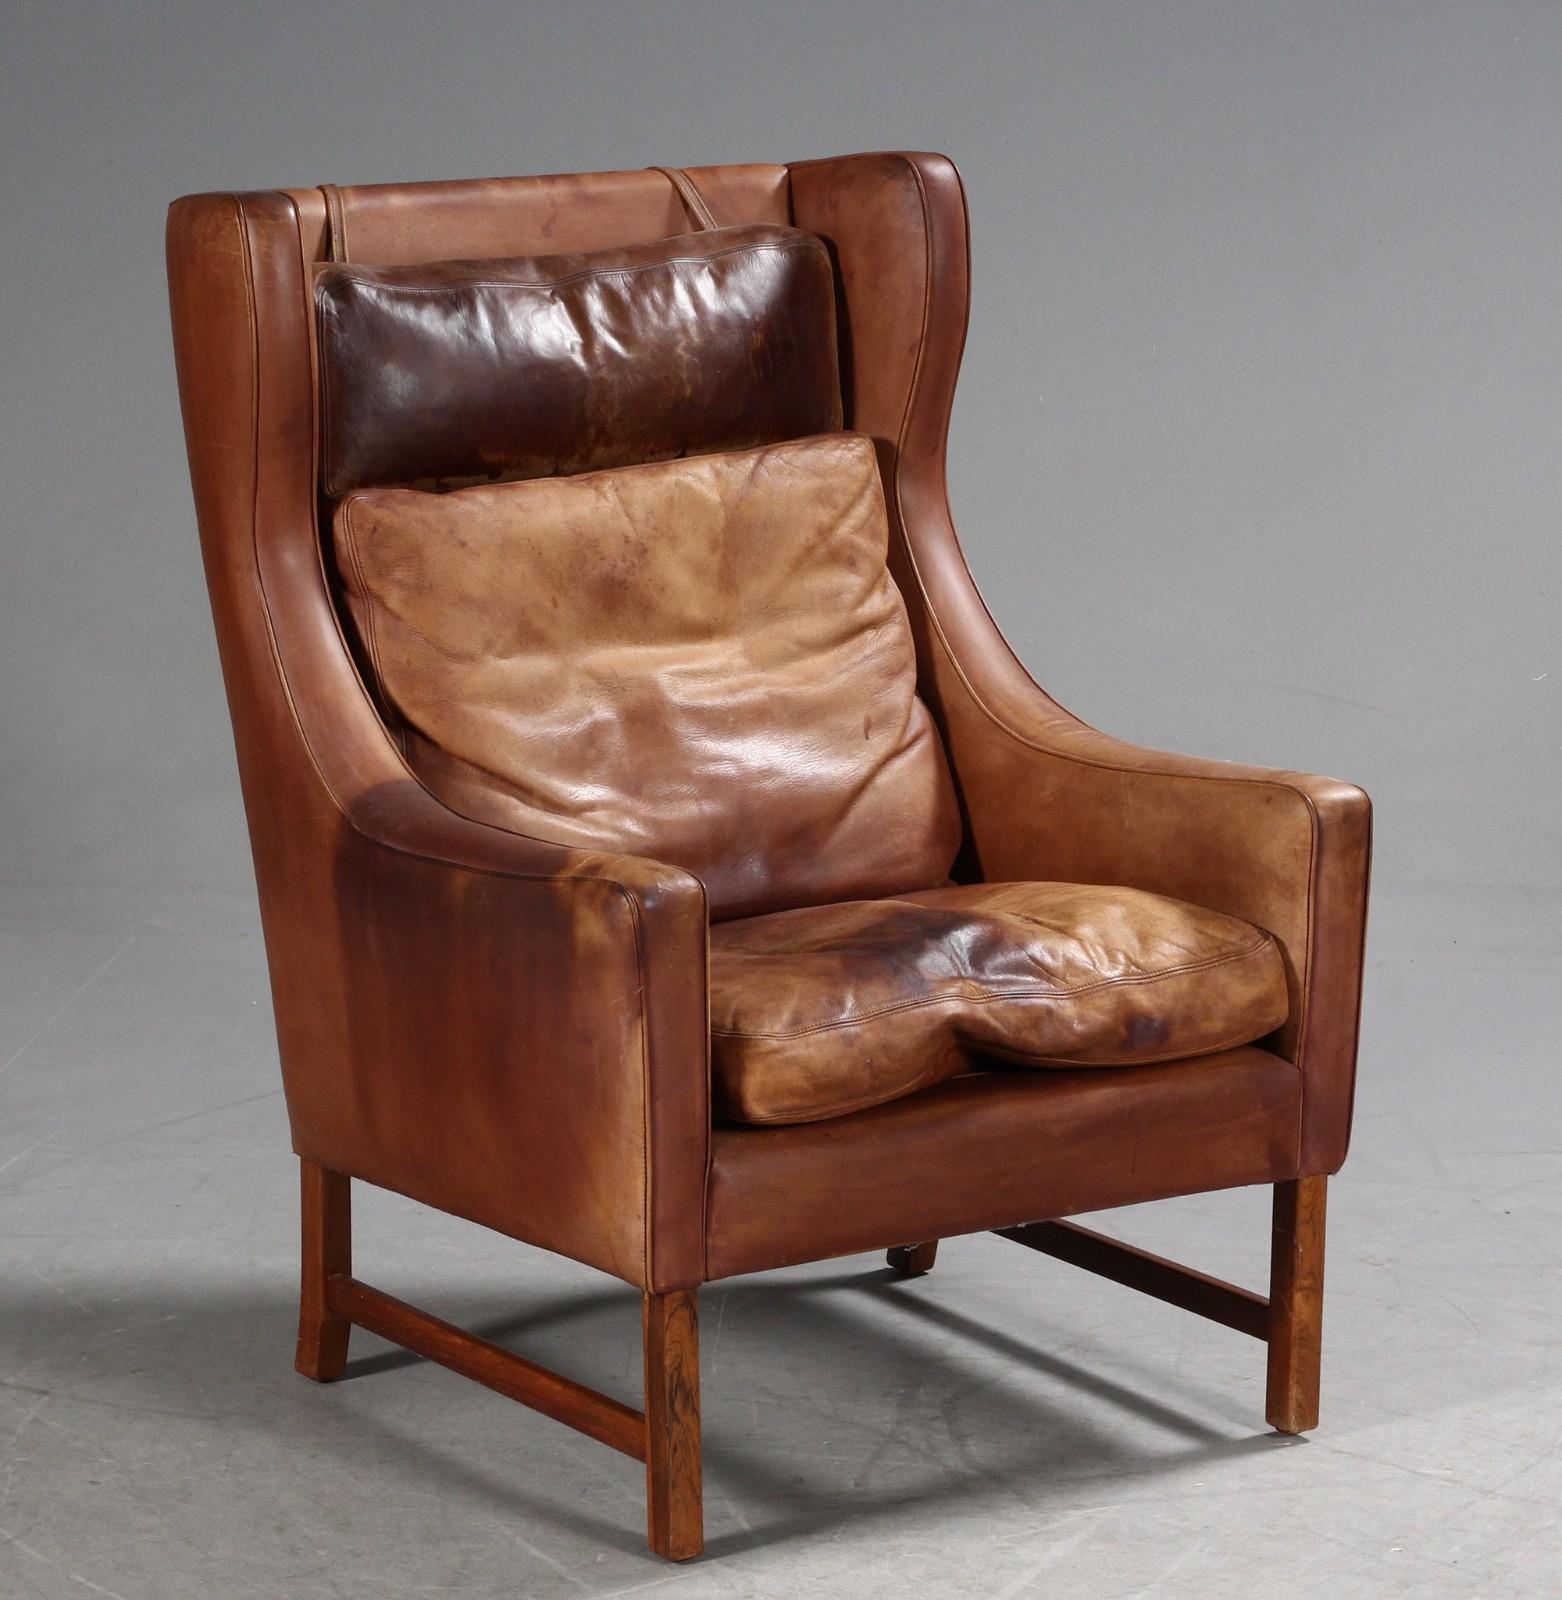 Scandinavian Modern Frederik A. Kayser Wingback Chair Upholstered in Cognac-Ccolored Leather For Sale